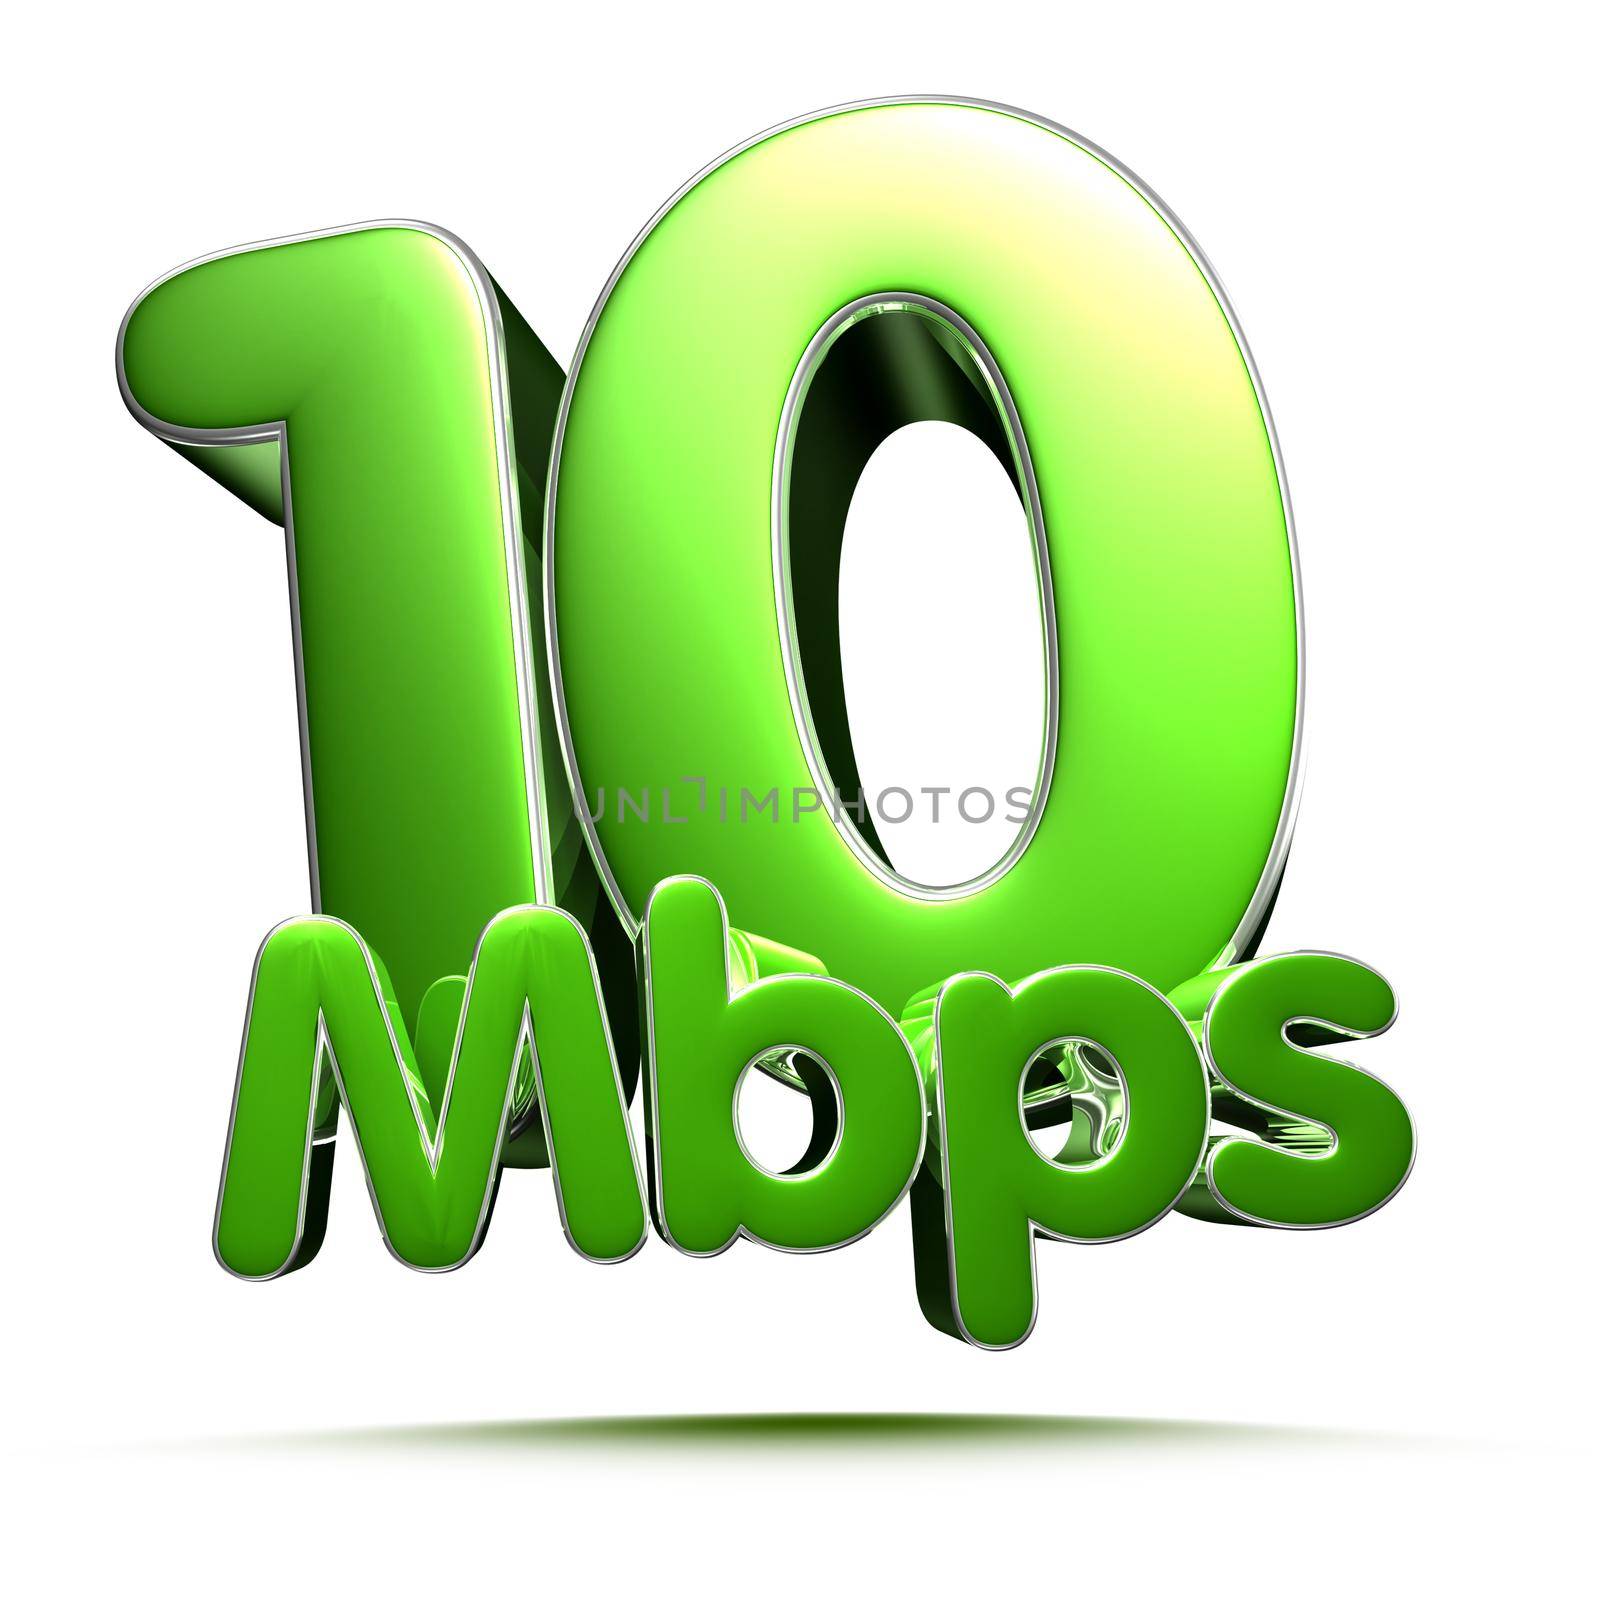 10 Mbps green 3D illustration on white background with clipping path. by thitimontoyai